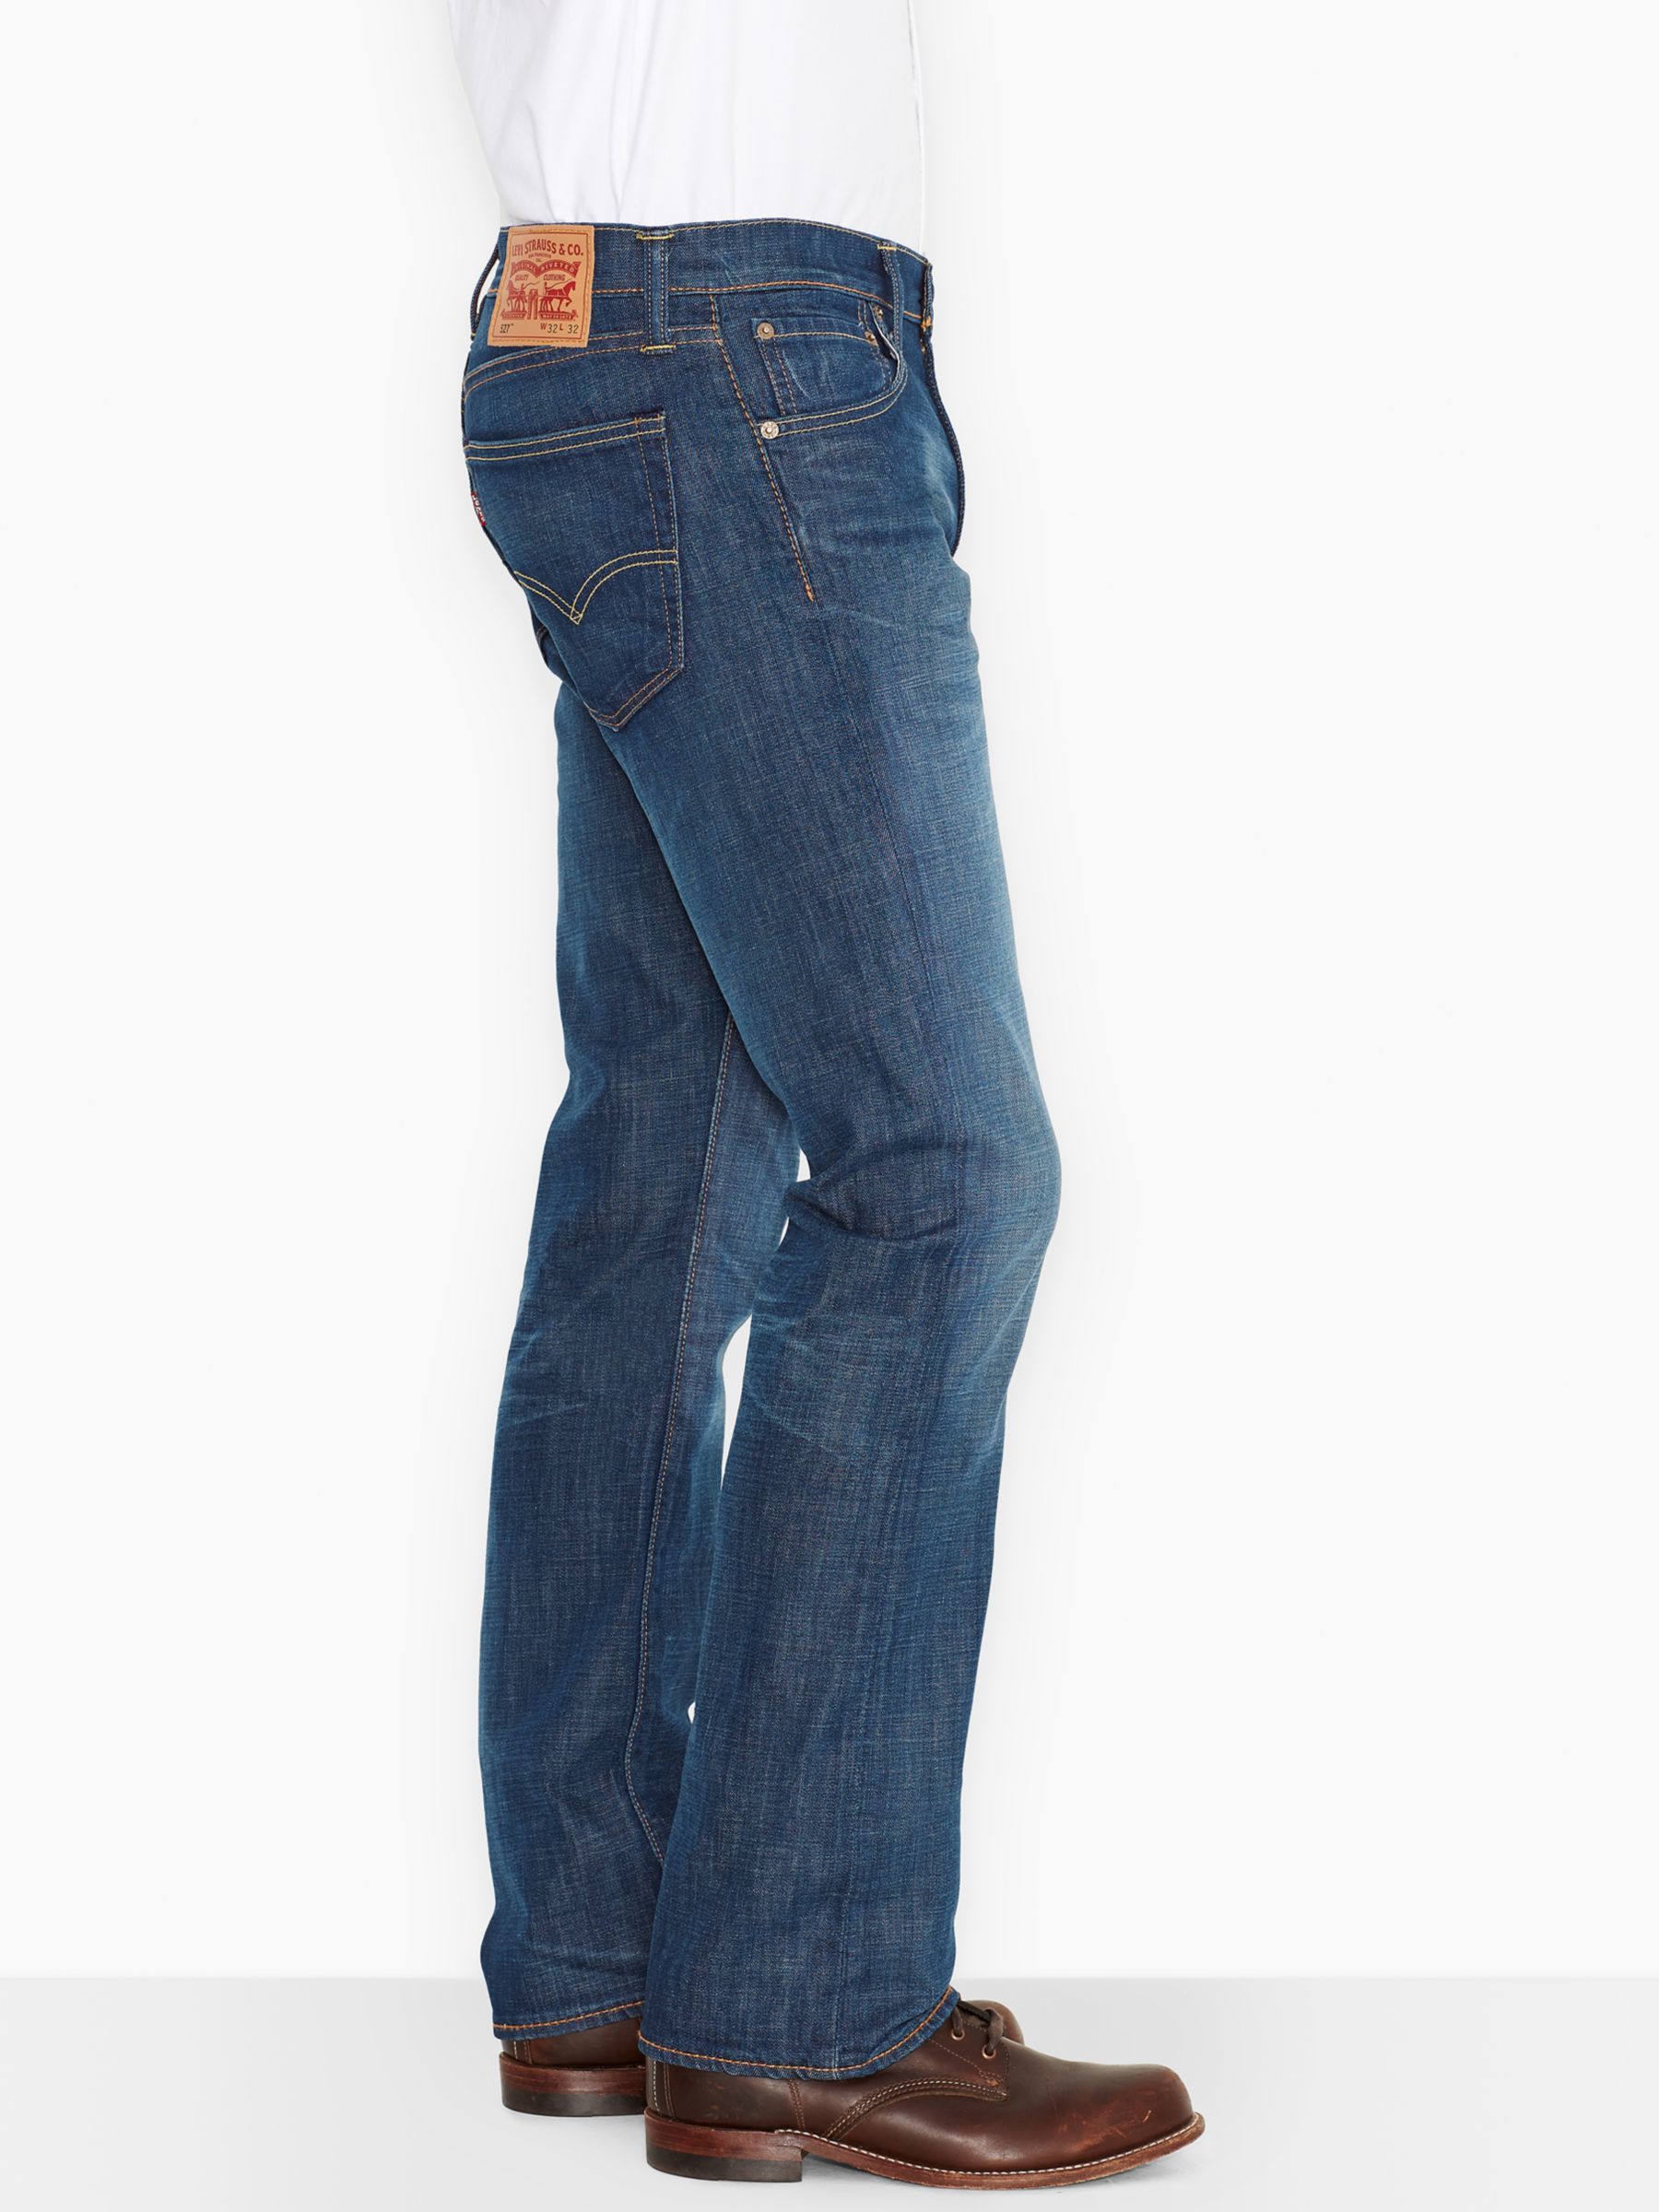 levis 527 mostly mid blue